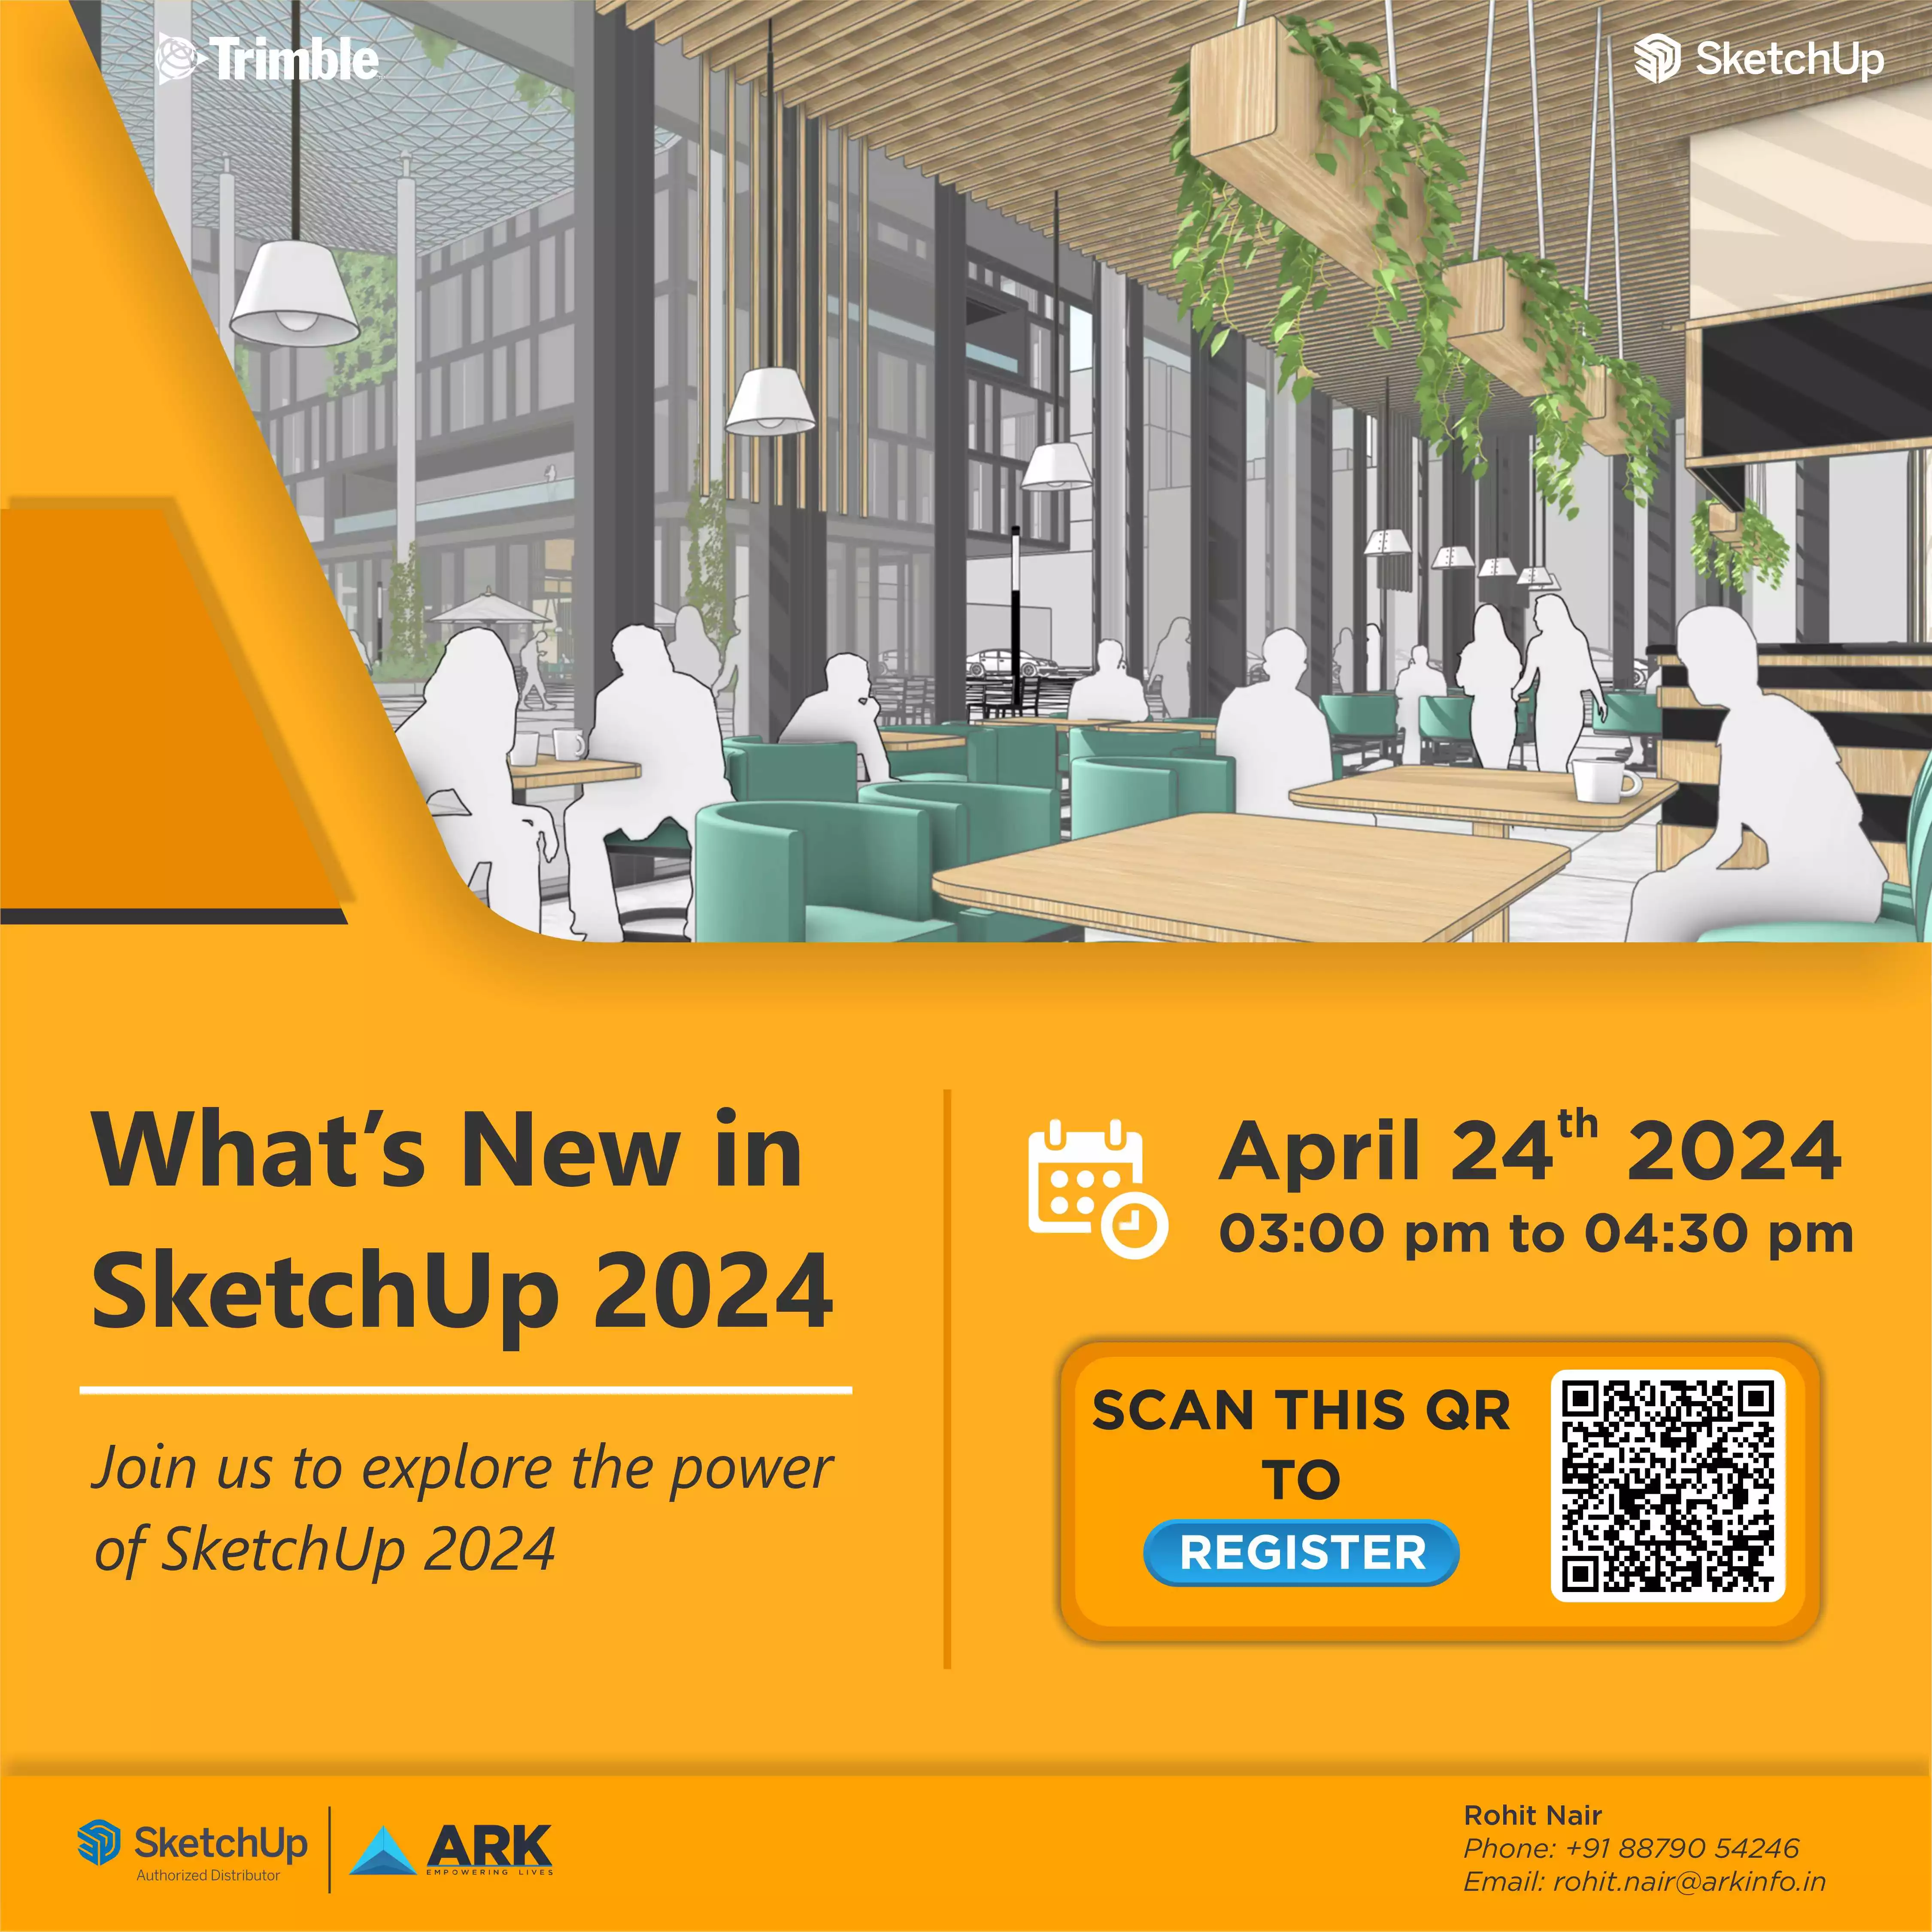 What's New in SketchUp 2024